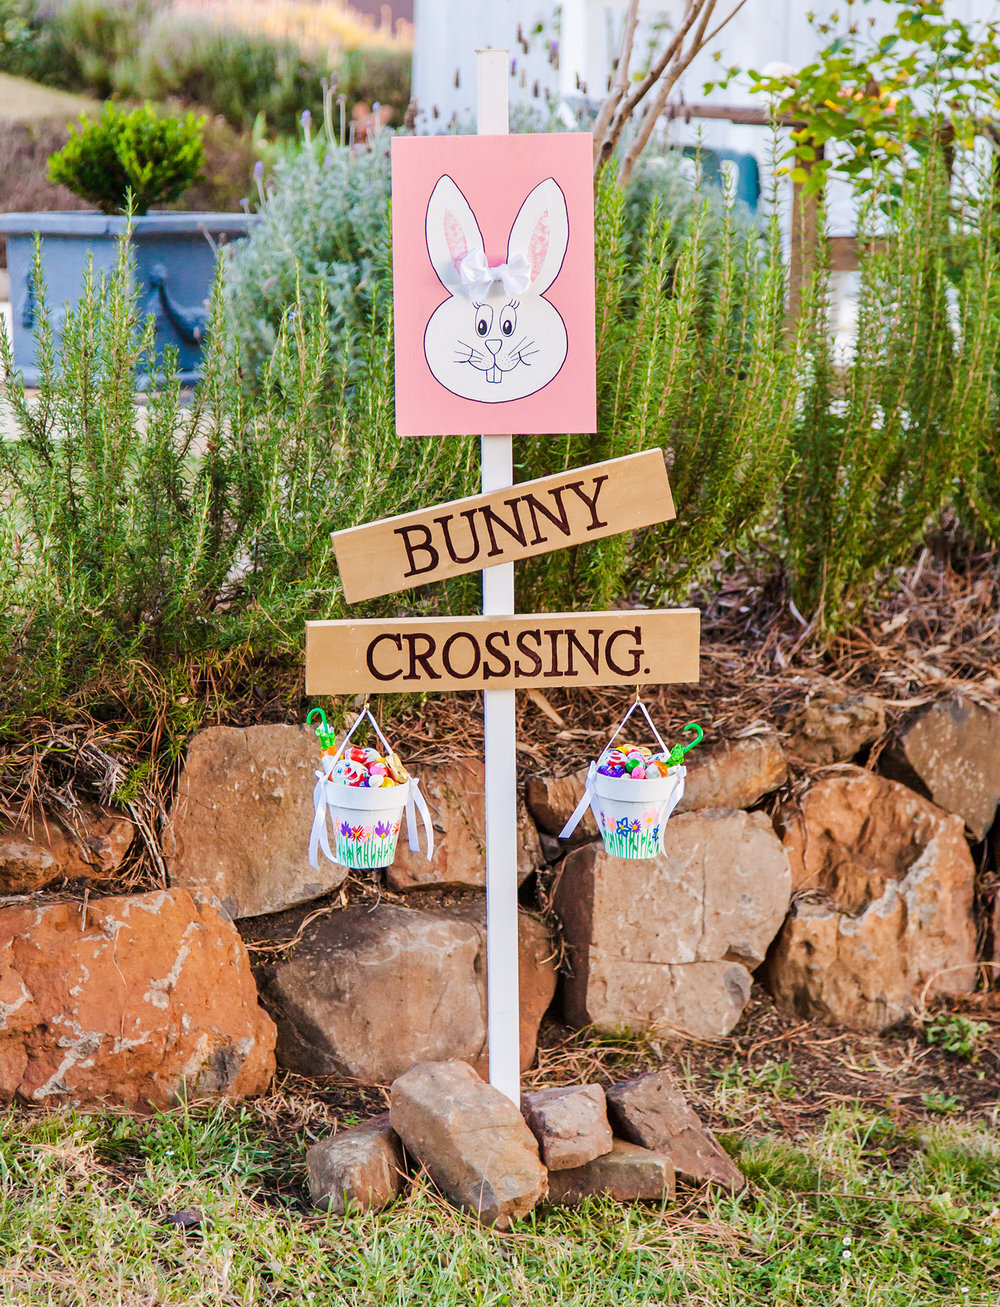 The bunny crossing sign for Easter